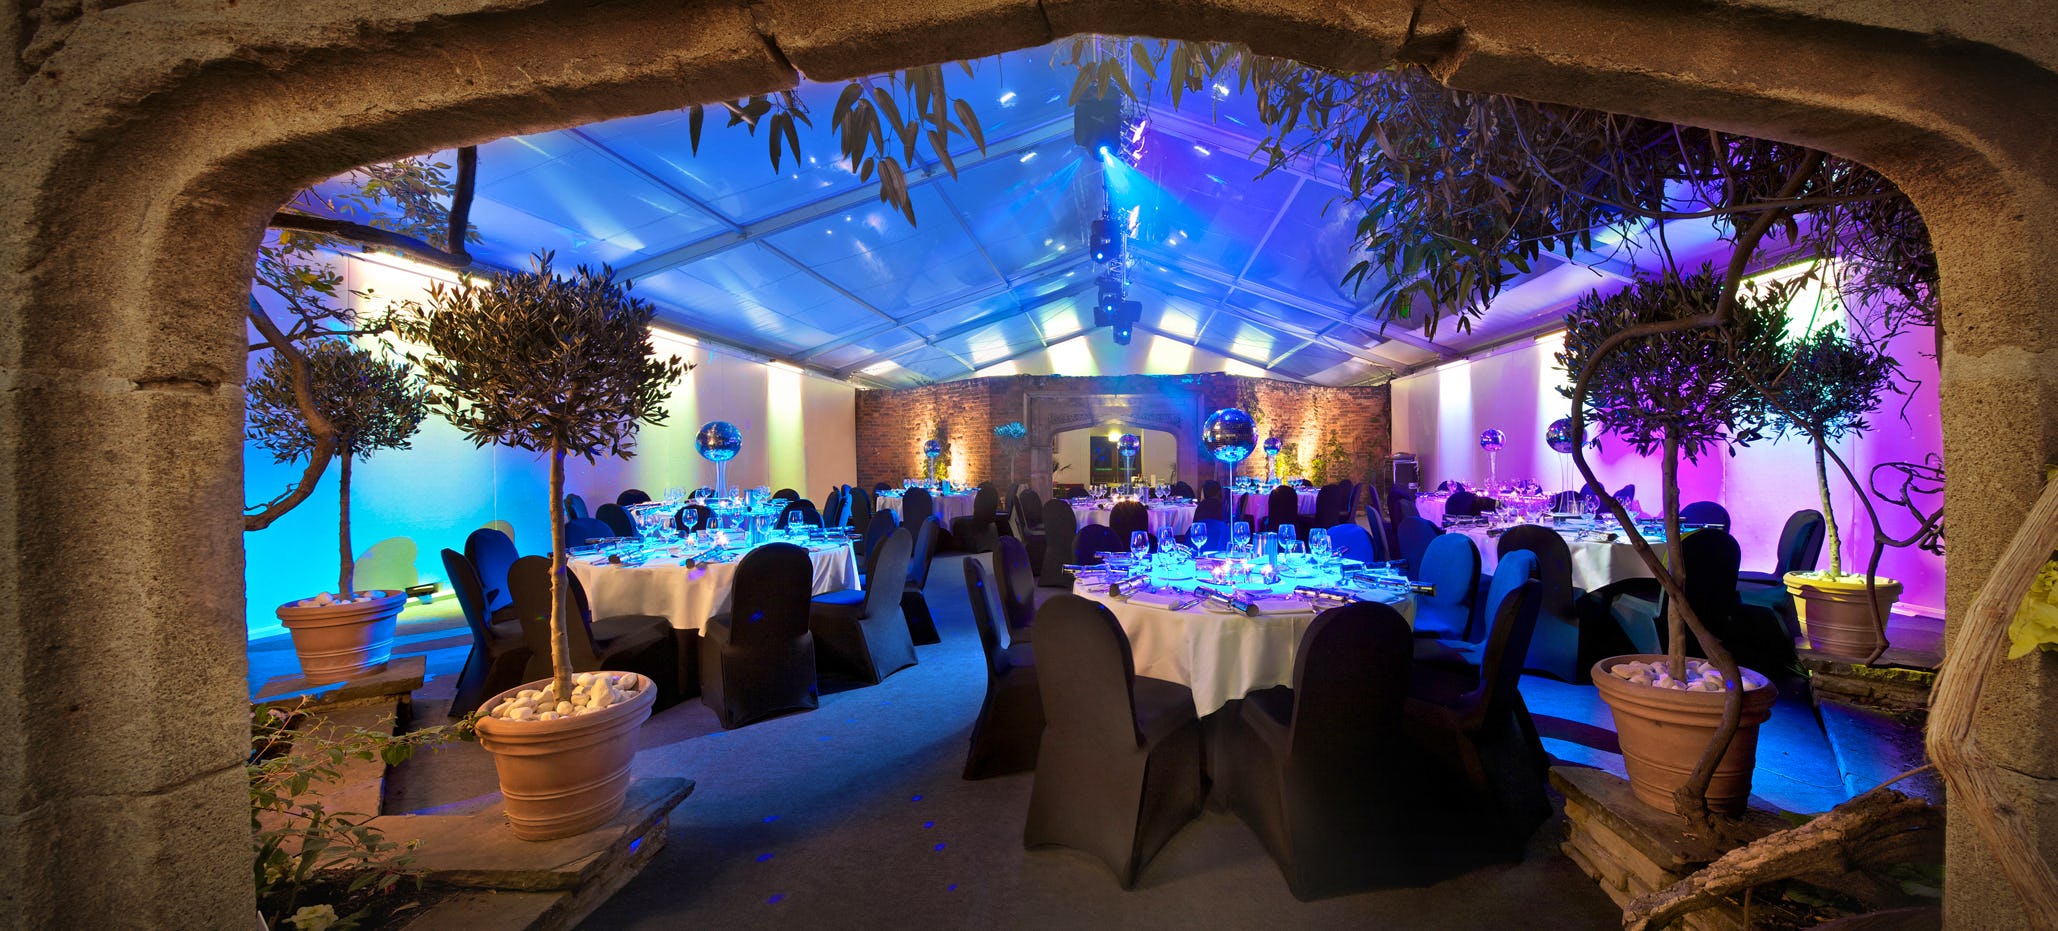 The Roof Gardens Winter marquee